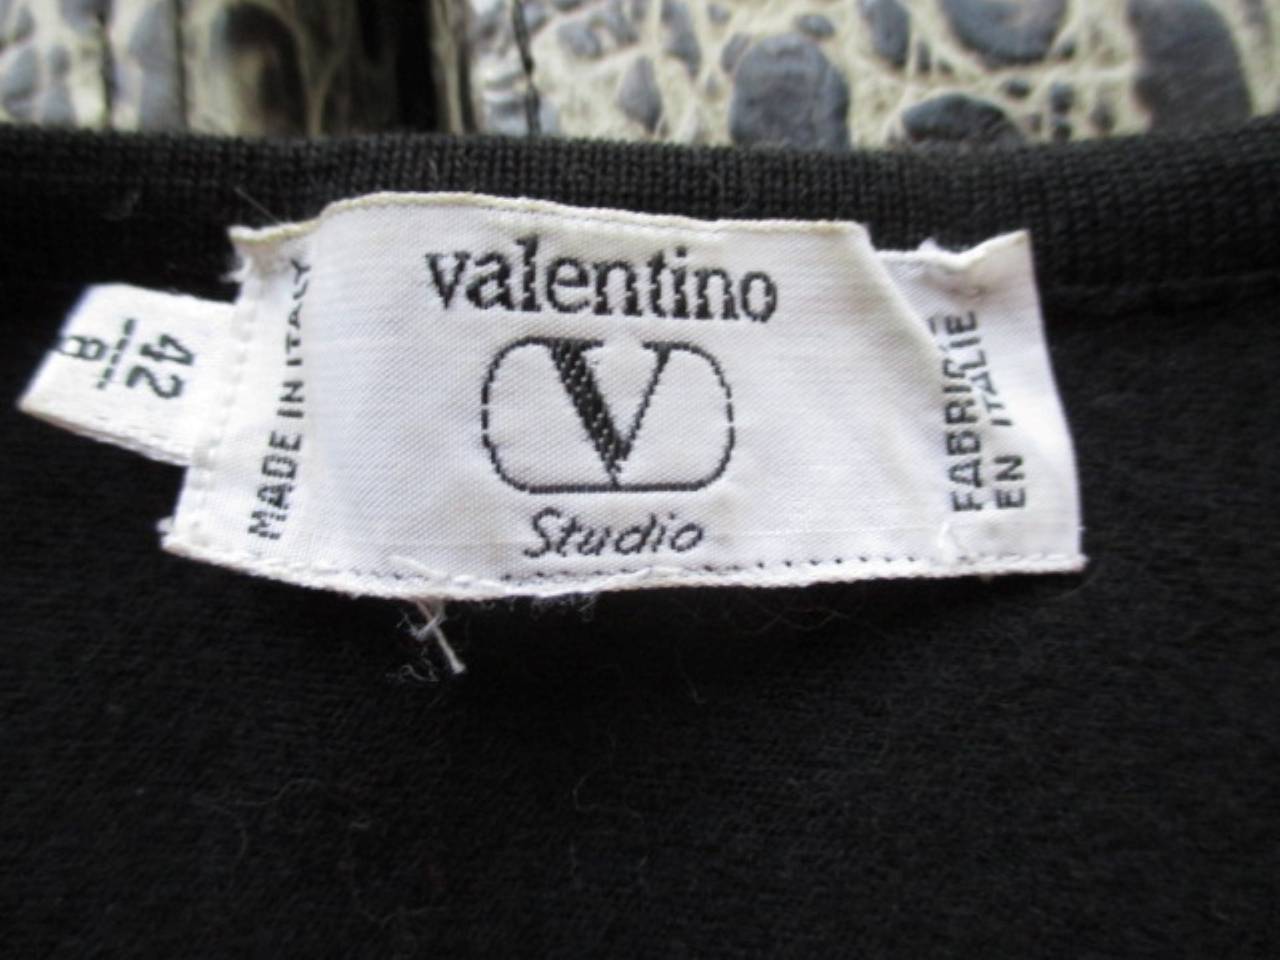 Black wool sweater from the Valentino collection 